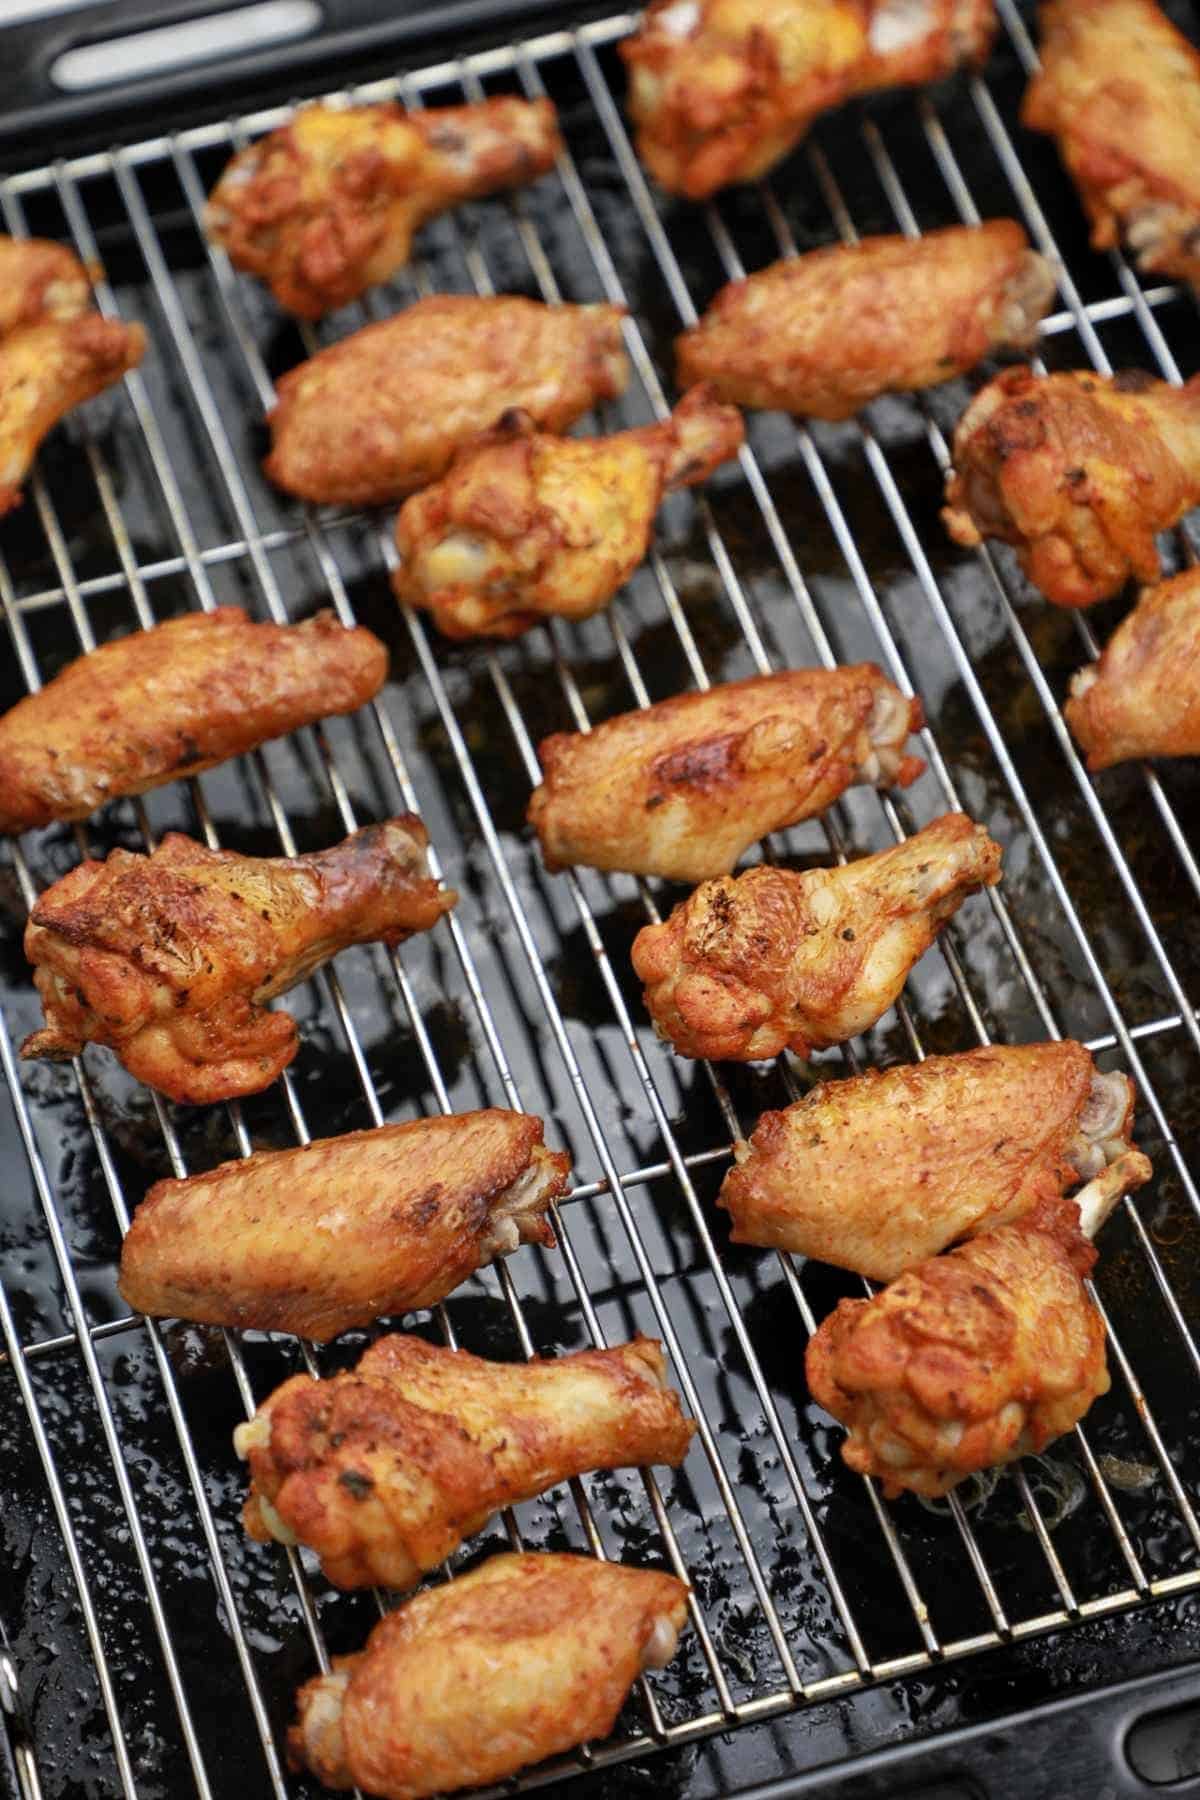 cooked wings on a baking rack.